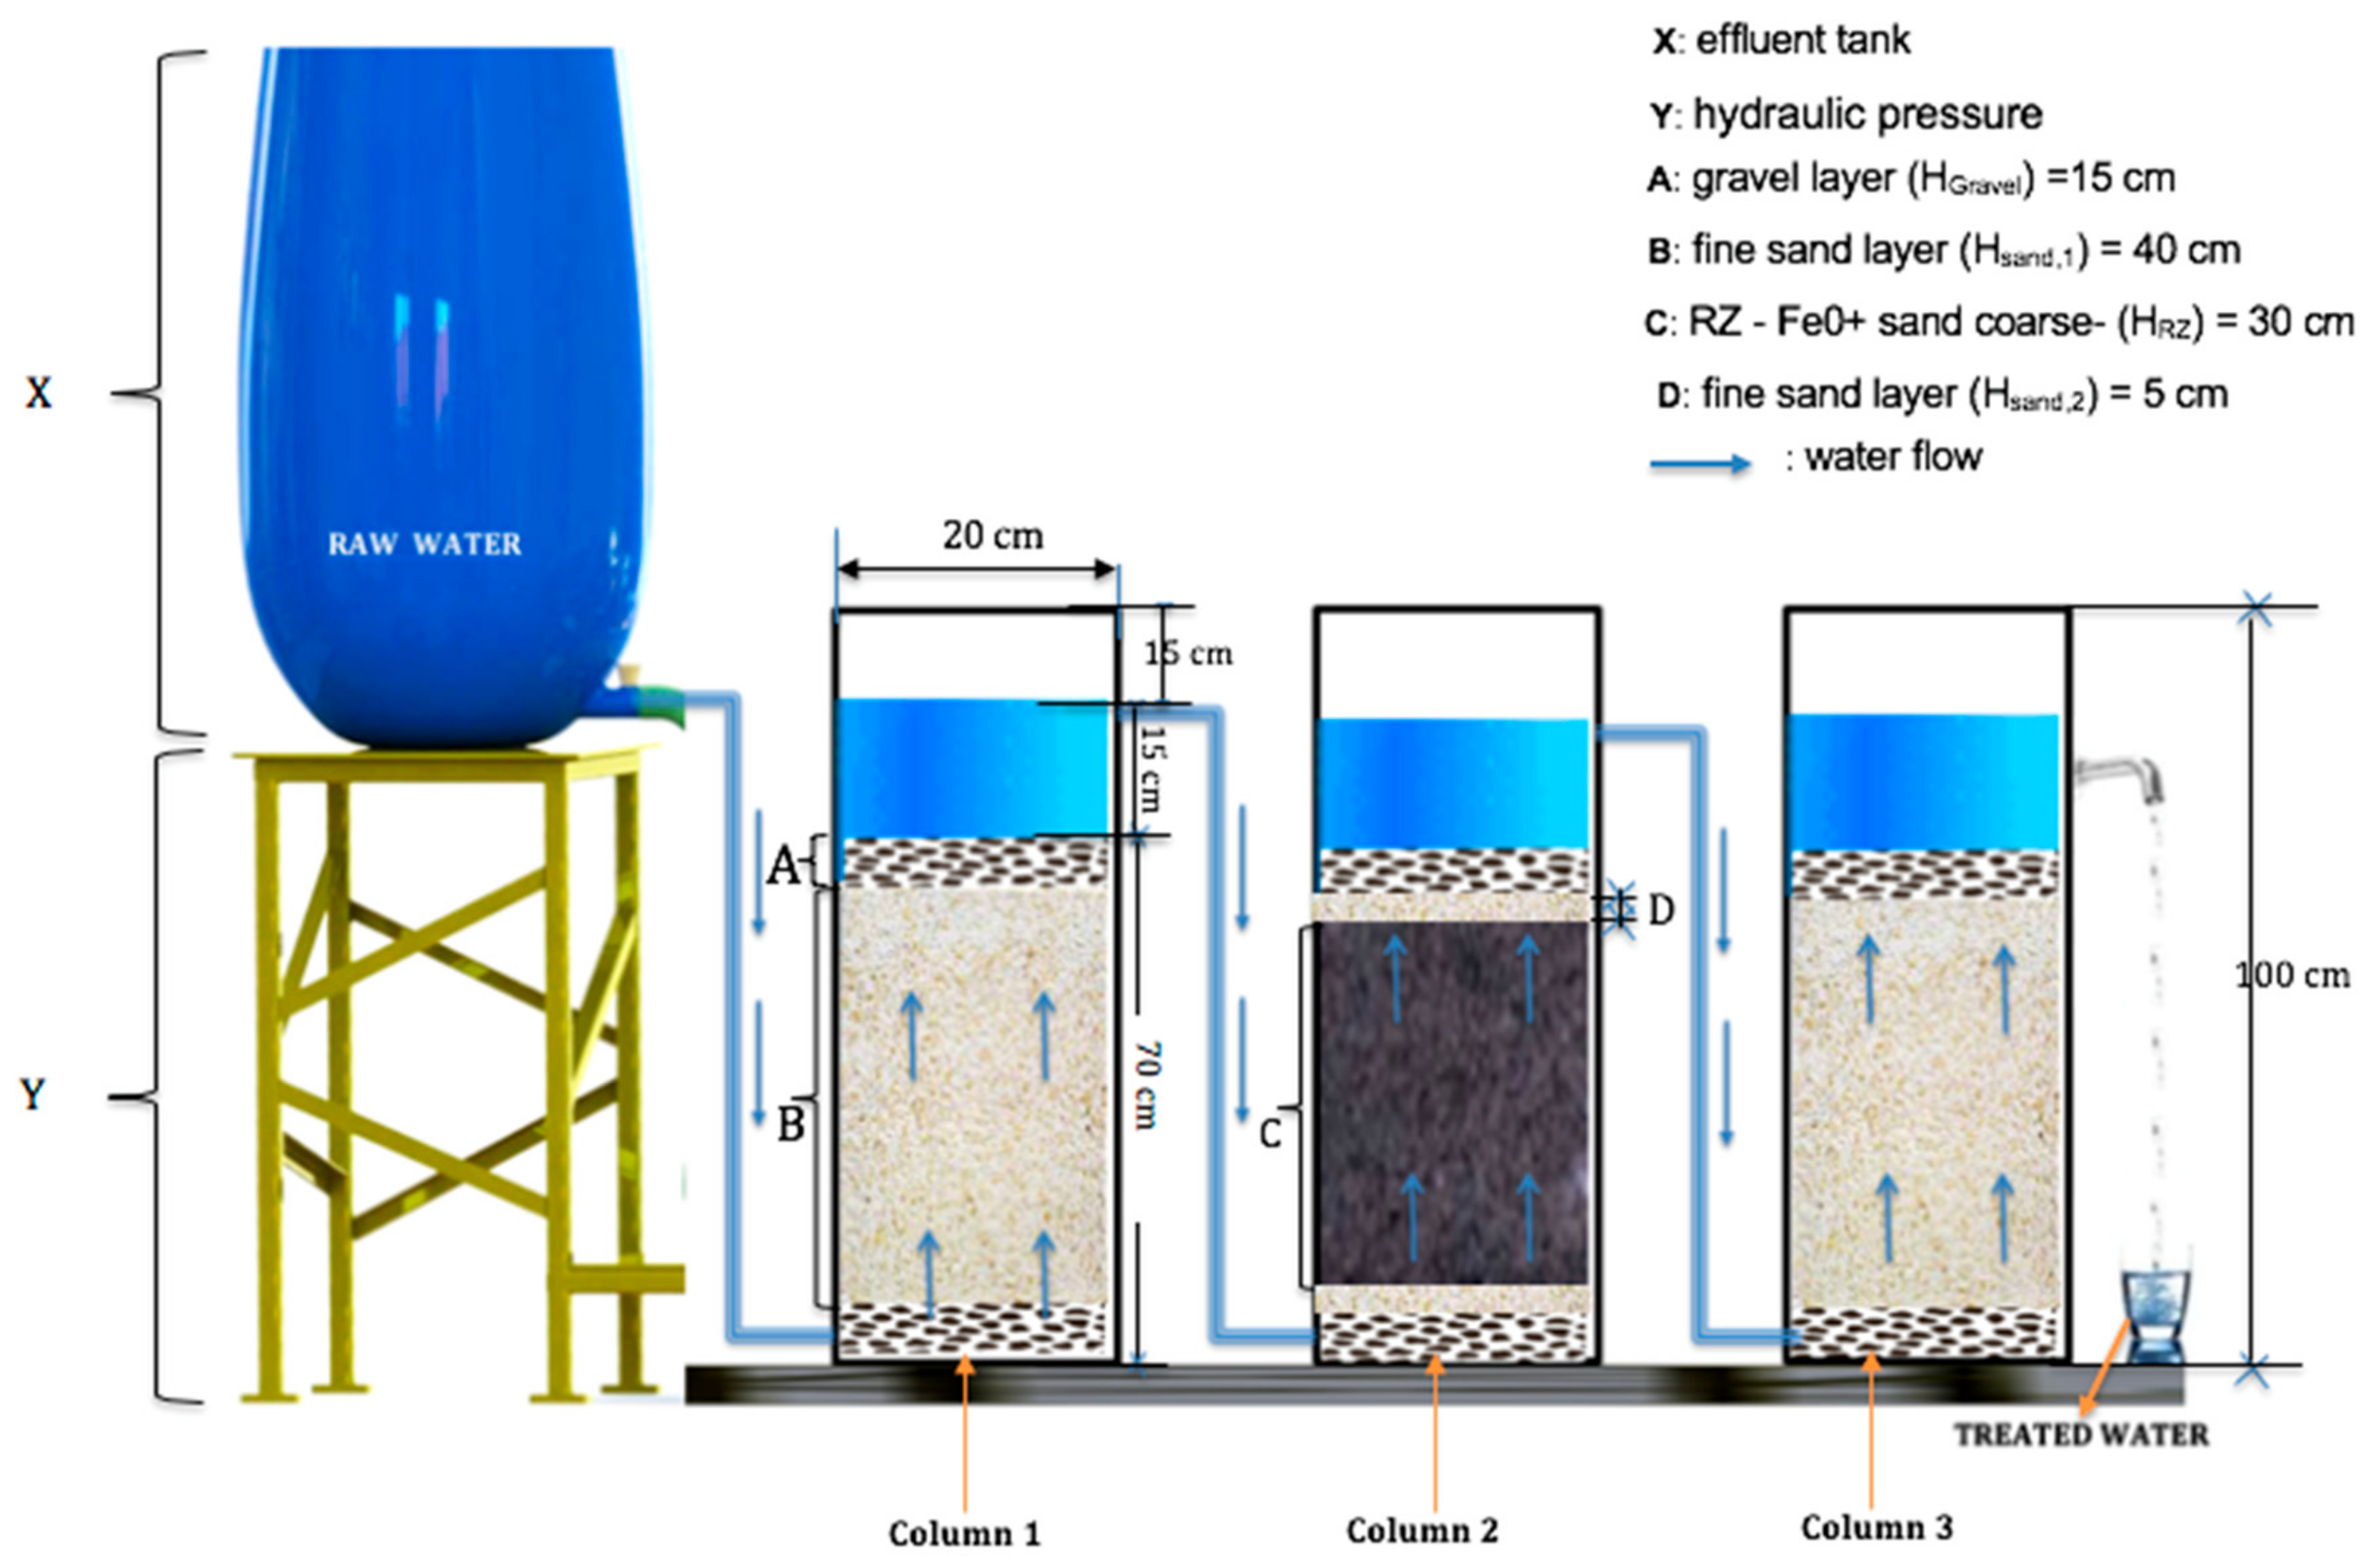 Schematic diagram of the designed filtration system: Well water was